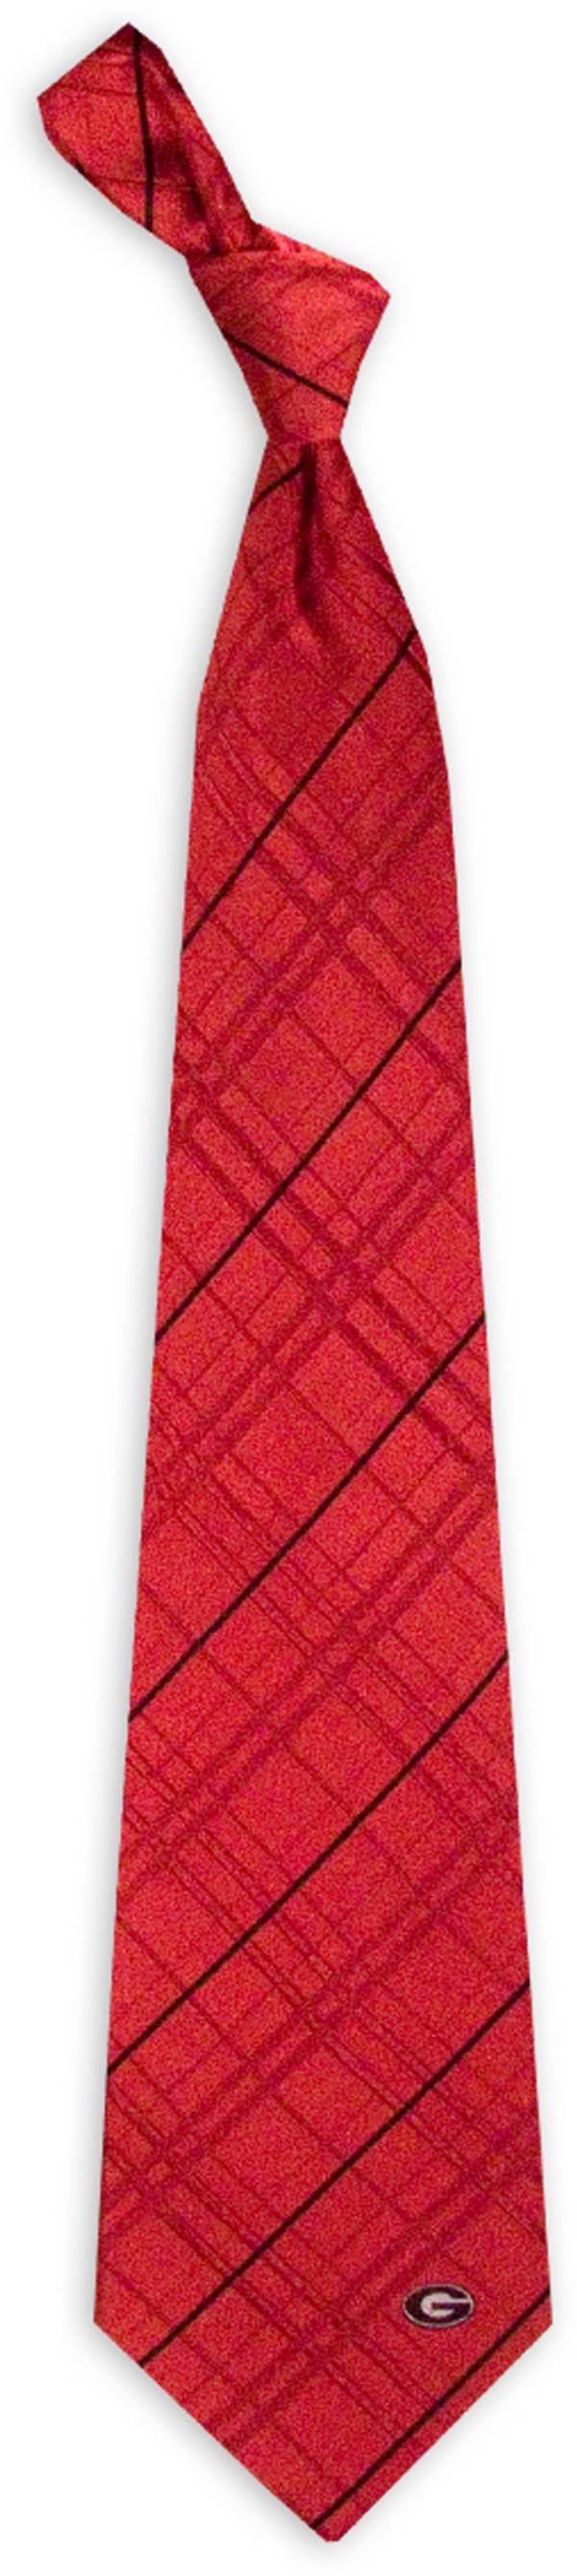 Eagles Wings Georgia Bulldogs Woven Oxford Necktie product image